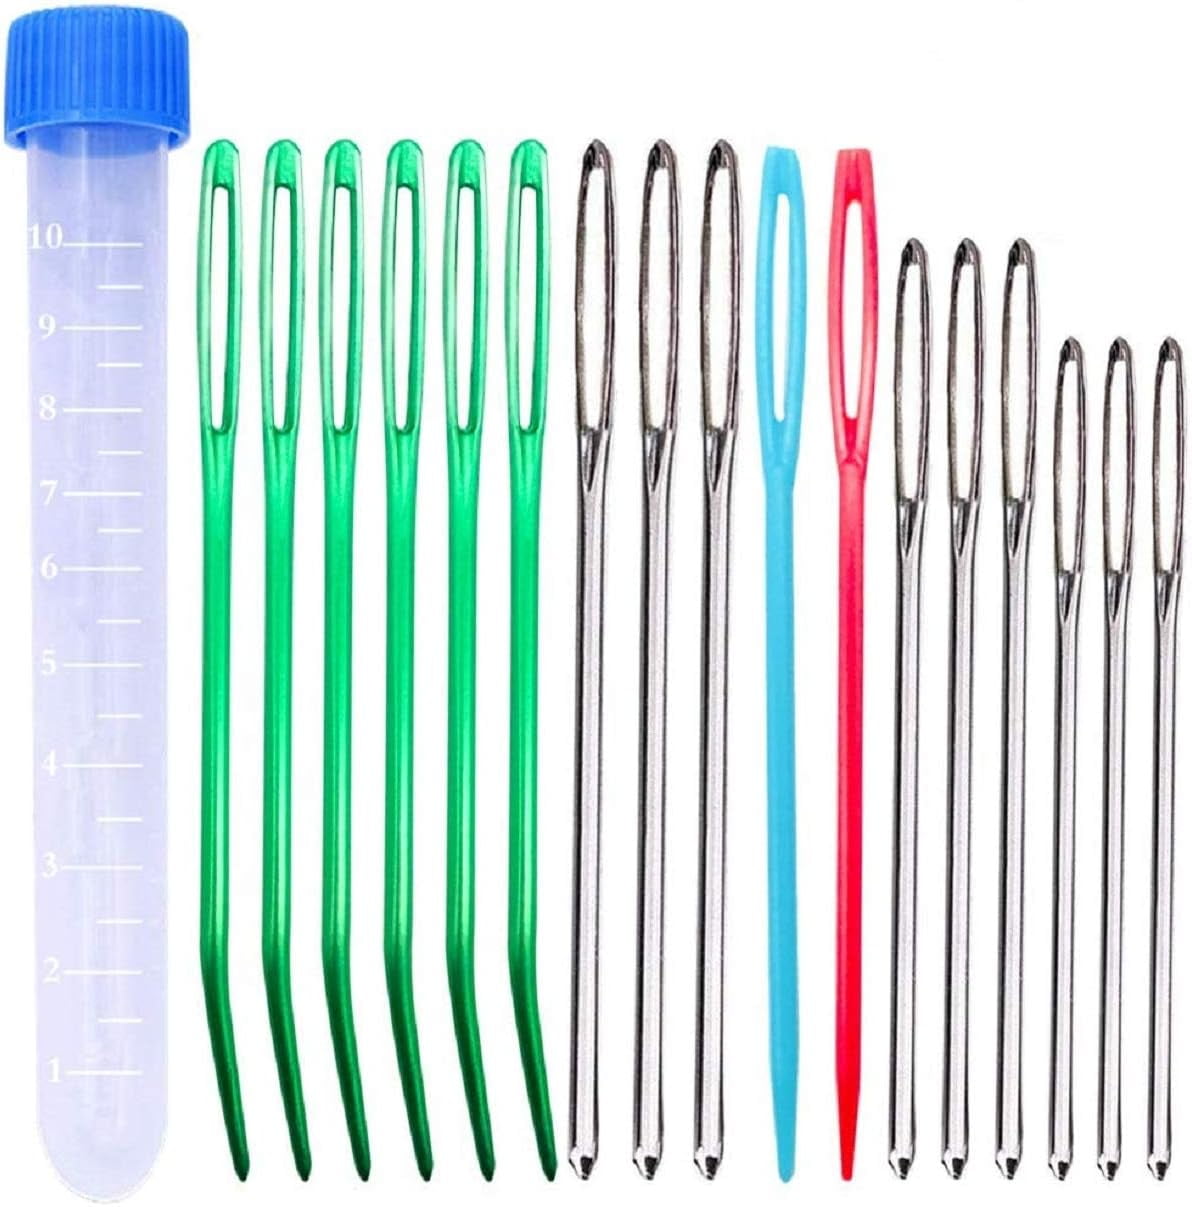 Tapestry darning Needle for Crochet - 5 Sizes Set with Large Eye Blunt  Needles for Knitting, Crafting Projects - 25 Pieces - Size 16, 18, 20, 22,  24